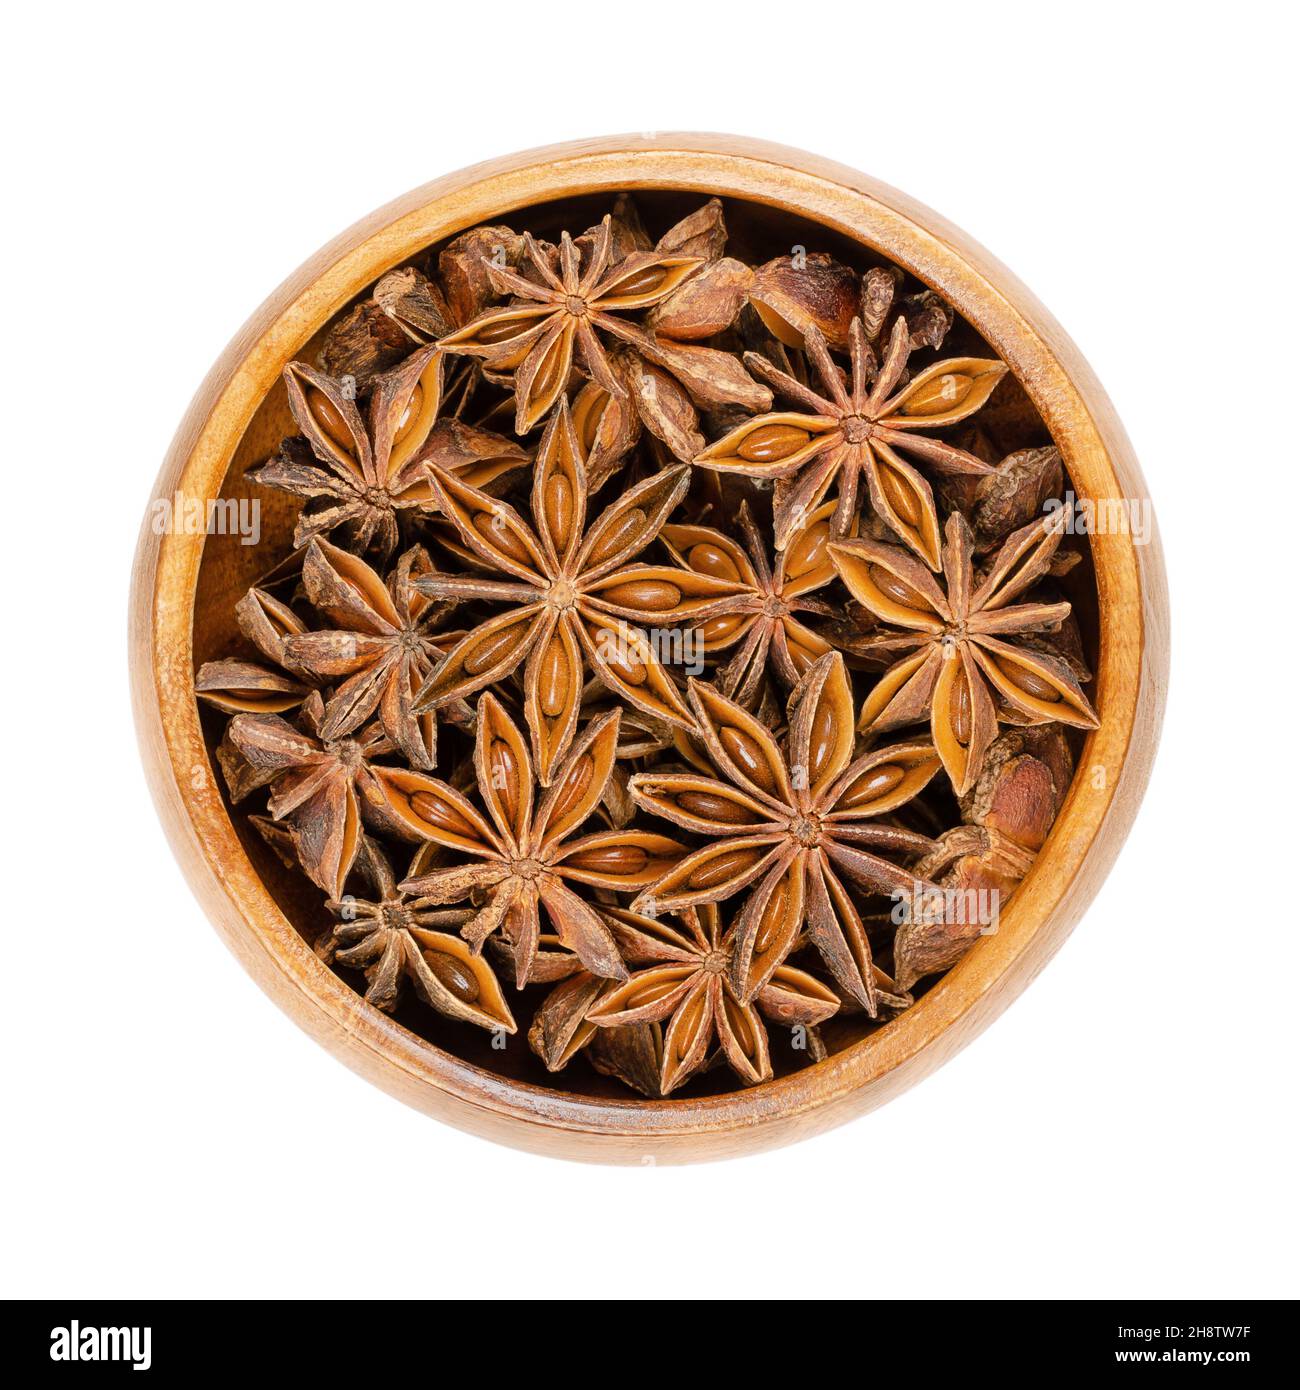 Star anise fruits and seeds, in a wooden bowl. Also known as staranise, star aniseed or badian. Dried, star-shaped pericarps of Illicium verum. Stock Photo